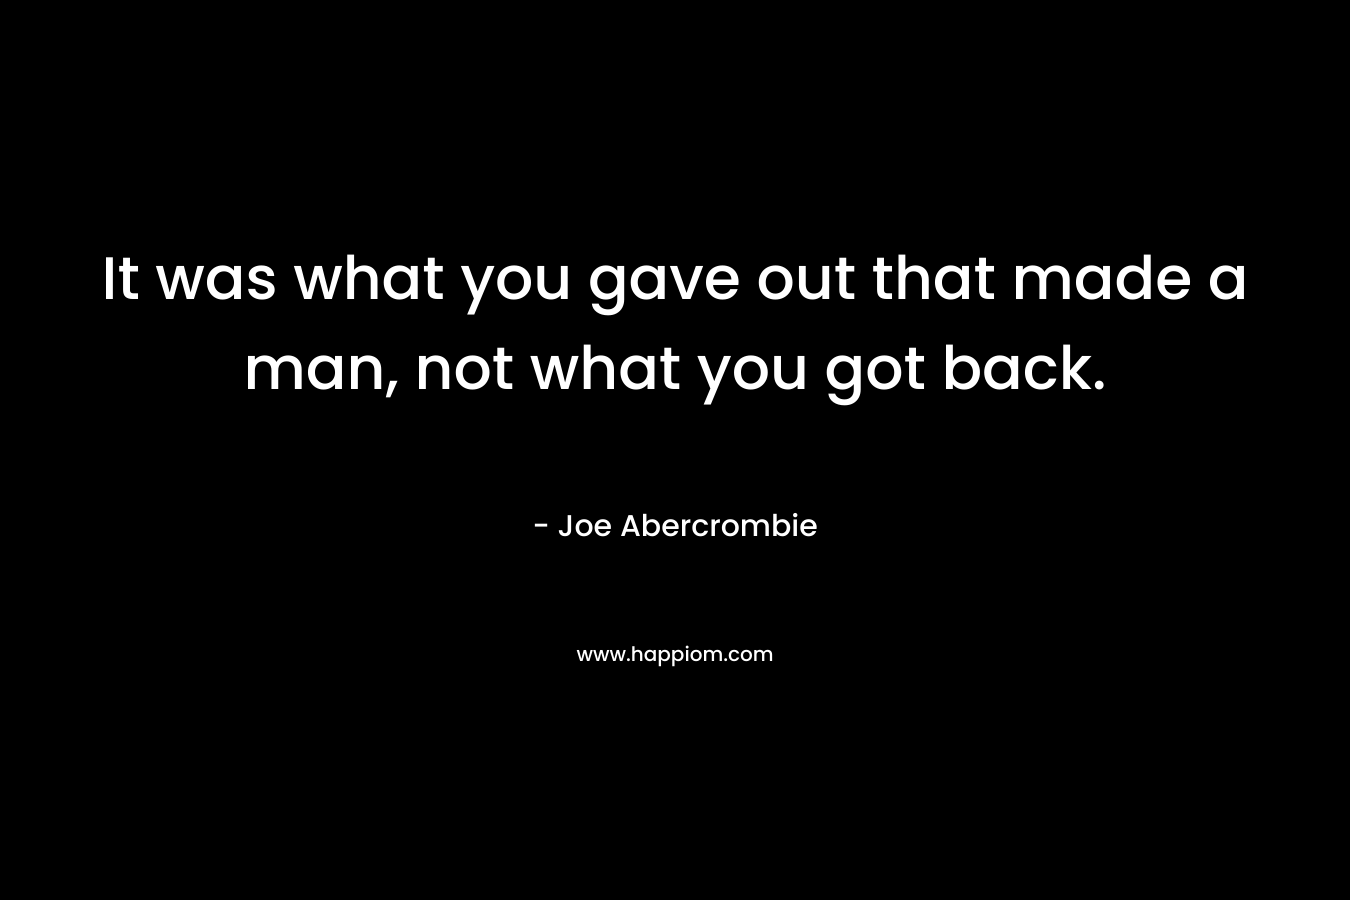 It was what you gave out that made a man, not what you got back. – Joe Abercrombie